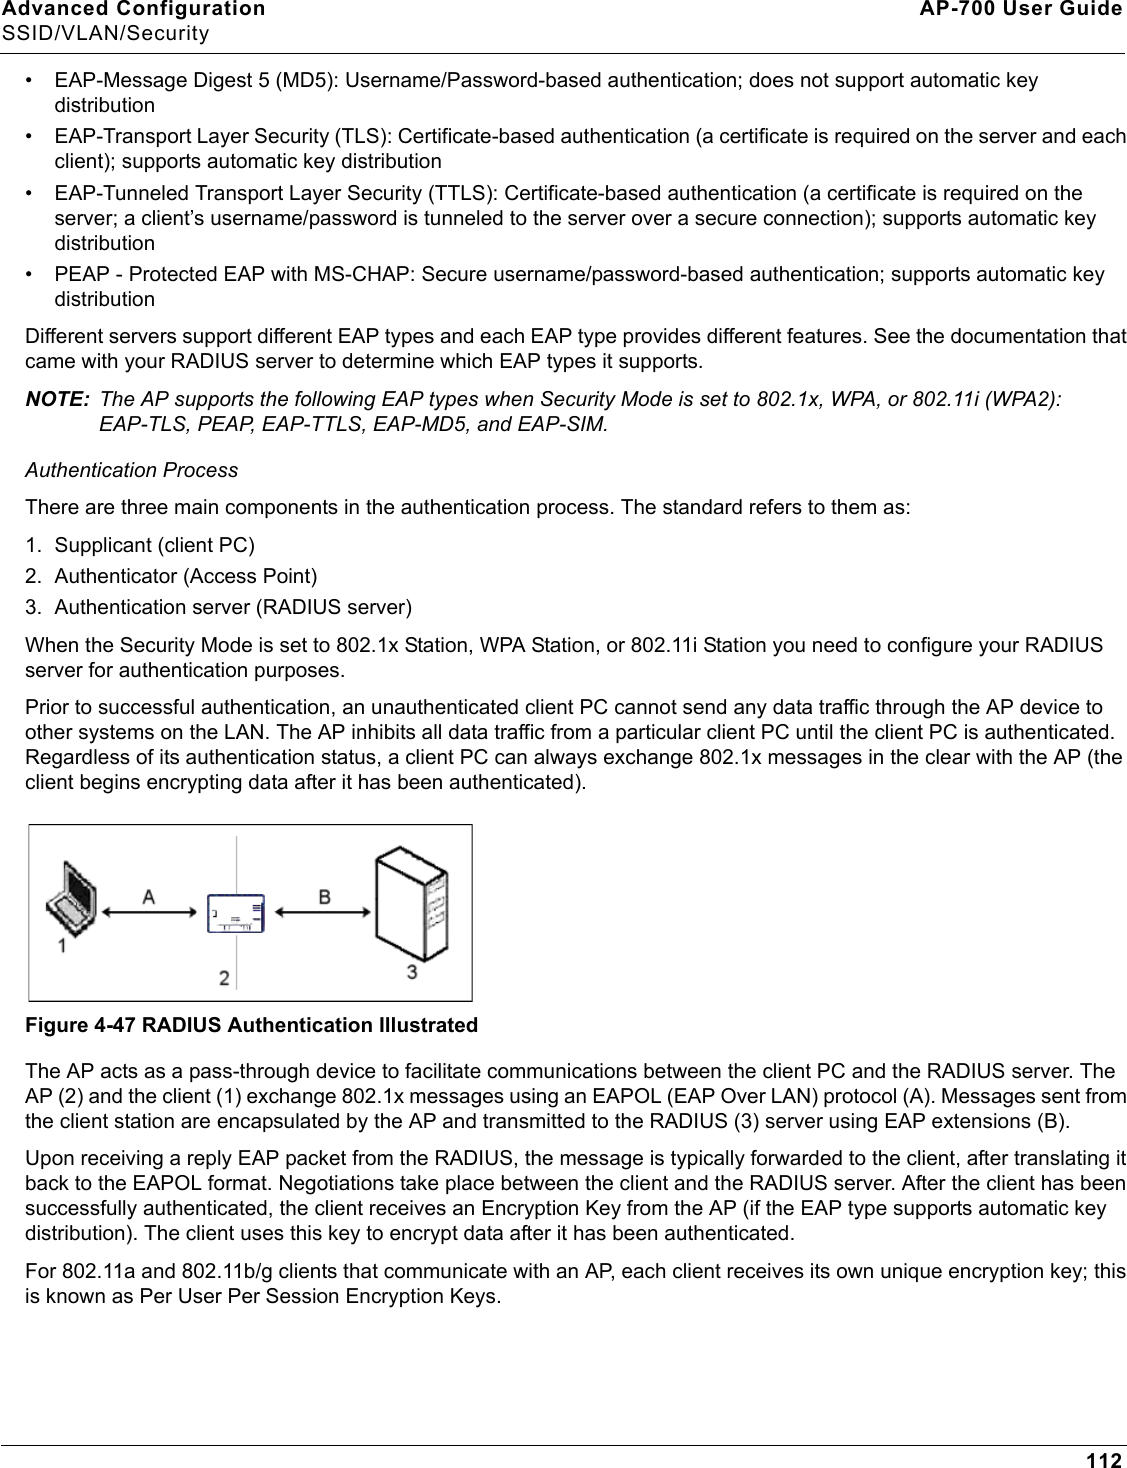 Advanced Configuration AP-700 User GuideSSID/VLAN/Security112• EAP-Message Digest 5 (MD5): Username/Password-based authentication; does not support automatic key distribution• EAP-Transport Layer Security (TLS): Certificate-based authentication (a certificate is required on the server and each client); supports automatic key distribution• EAP-Tunneled Transport Layer Security (TTLS): Certificate-based authentication (a certificate is required on the server; a client’s username/password is tunneled to the server over a secure connection); supports automatic key distribution• PEAP - Protected EAP with MS-CHAP: Secure username/password-based authentication; supports automatic key distributionDifferent servers support different EAP types and each EAP type provides different features. See the documentation that came with your RADIUS server to determine which EAP types it supports.NOTE: The AP supports the following EAP types when Security Mode is set to 802.1x, WPA, or 802.11i (WPA2): EAP-TLS, PEAP, EAP-TTLS, EAP-MD5, and EAP-SIM.Authentication ProcessThere are three main components in the authentication process. The standard refers to them as:1. Supplicant (client PC)2. Authenticator (Access Point)3. Authentication server (RADIUS server)When the Security Mode is set to 802.1x Station, WPA Station, or 802.11i Station you need to configure your RADIUS server for authentication purposes.Prior to successful authentication, an unauthenticated client PC cannot send any data traffic through the AP device to other systems on the LAN. The AP inhibits all data traffic from a particular client PC until the client PC is authenticated. Regardless of its authentication status, a client PC can always exchange 802.1x messages in the clear with the AP (the client begins encrypting data after it has been authenticated).Figure 4-47 RADIUS Authentication IllustratedThe AP acts as a pass-through device to facilitate communications between the client PC and the RADIUS server. The AP (2) and the client (1) exchange 802.1x messages using an EAPOL (EAP Over LAN) protocol (A). Messages sent from the client station are encapsulated by the AP and transmitted to the RADIUS (3) server using EAP extensions (B).Upon receiving a reply EAP packet from the RADIUS, the message is typically forwarded to the client, after translating it back to the EAPOL format. Negotiations take place between the client and the RADIUS server. After the client has been successfully authenticated, the client receives an Encryption Key from the AP (if the EAP type supports automatic key distribution). The client uses this key to encrypt data after it has been authenticated. For 802.11a and 802.11b/g clients that communicate with an AP, each client receives its own unique encryption key; this is known as Per User Per Session Encryption Keys.